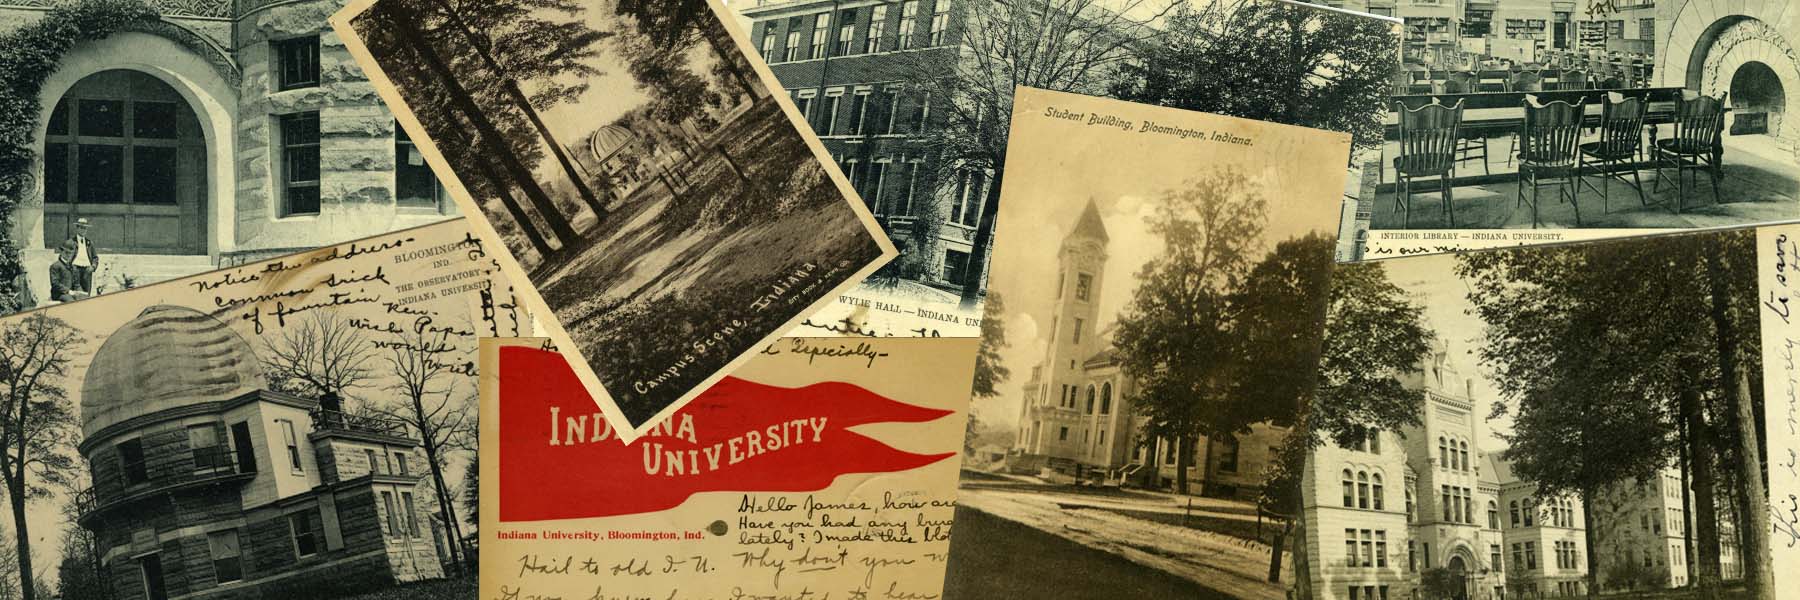 A collage of yellowed postcards all depicting the Indiana University campus. One postcard has a bright red Indiana University flag.